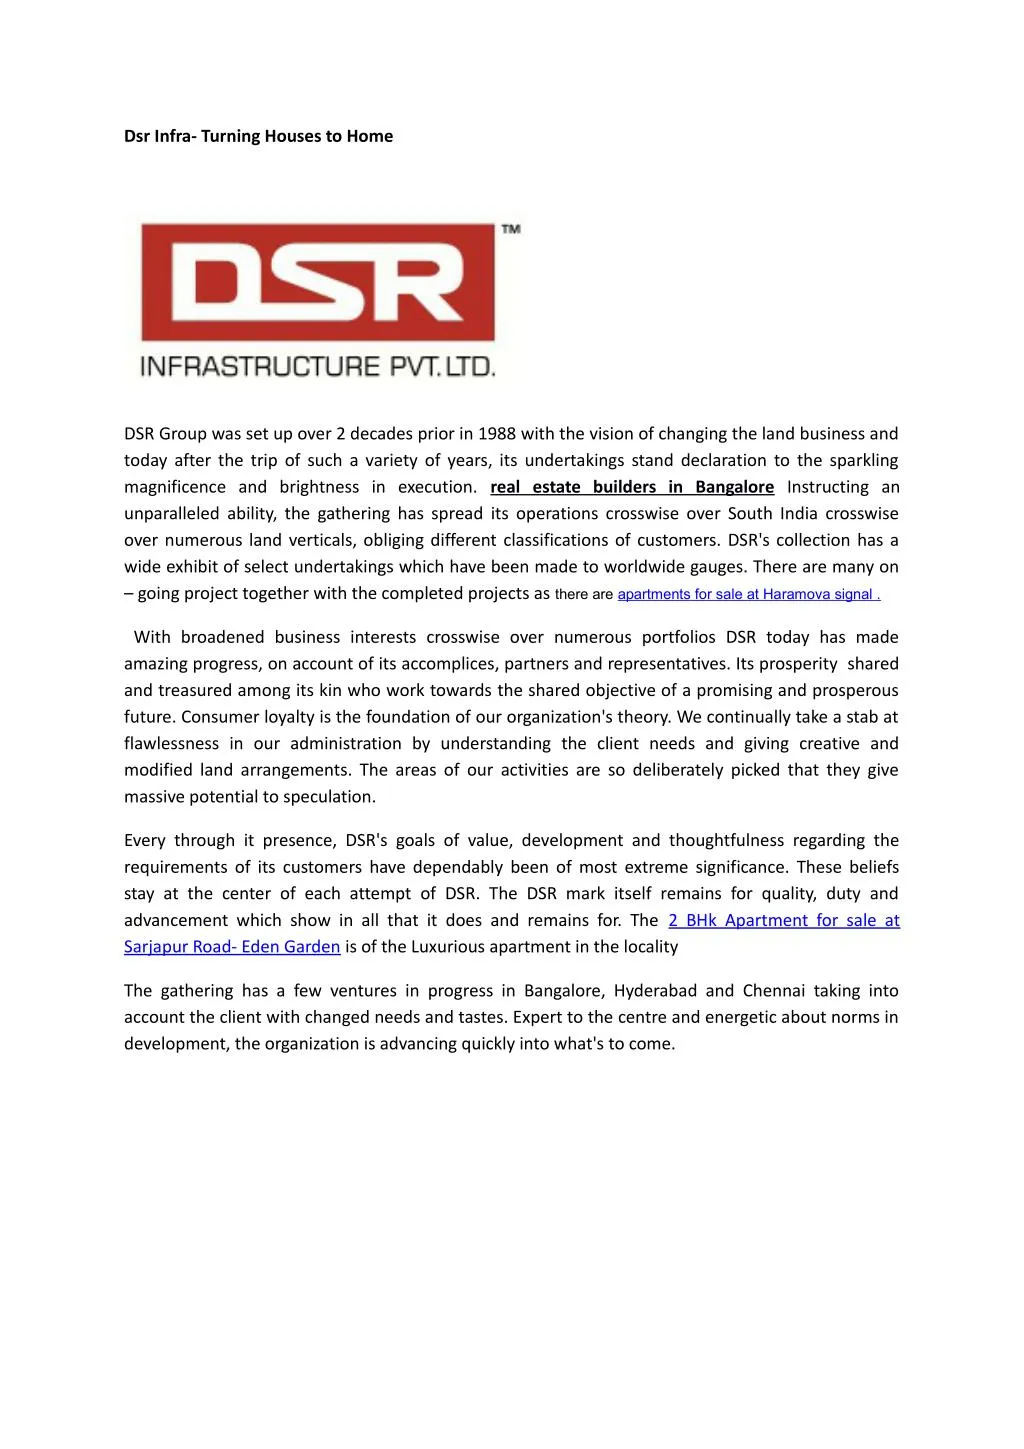 dsr infra turning houses to home